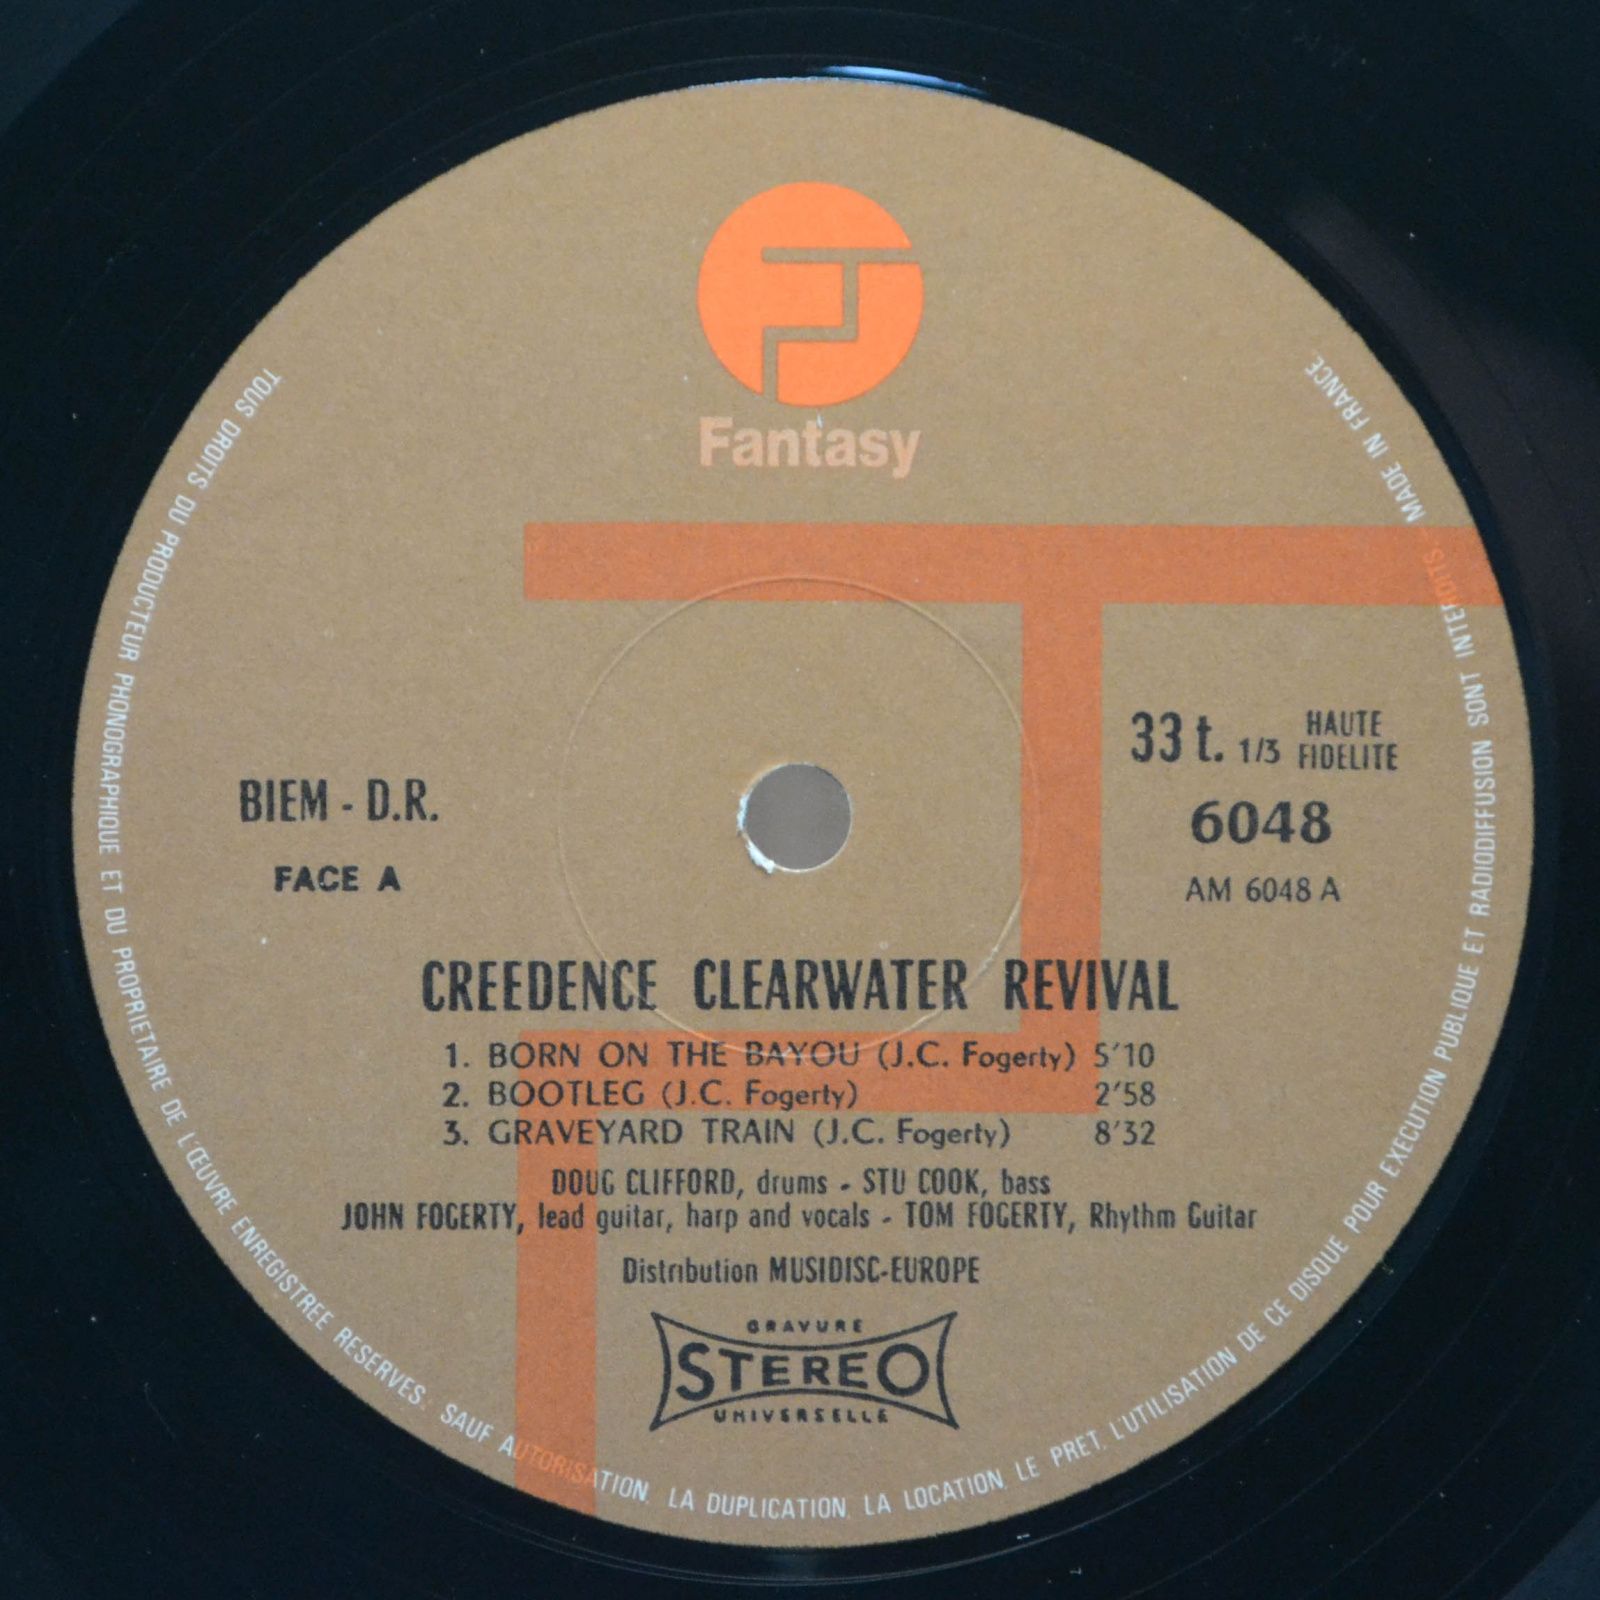 Creedence Clearwater Revival — Creedence Clearwater Revival 1968/69 (2LP), 1978